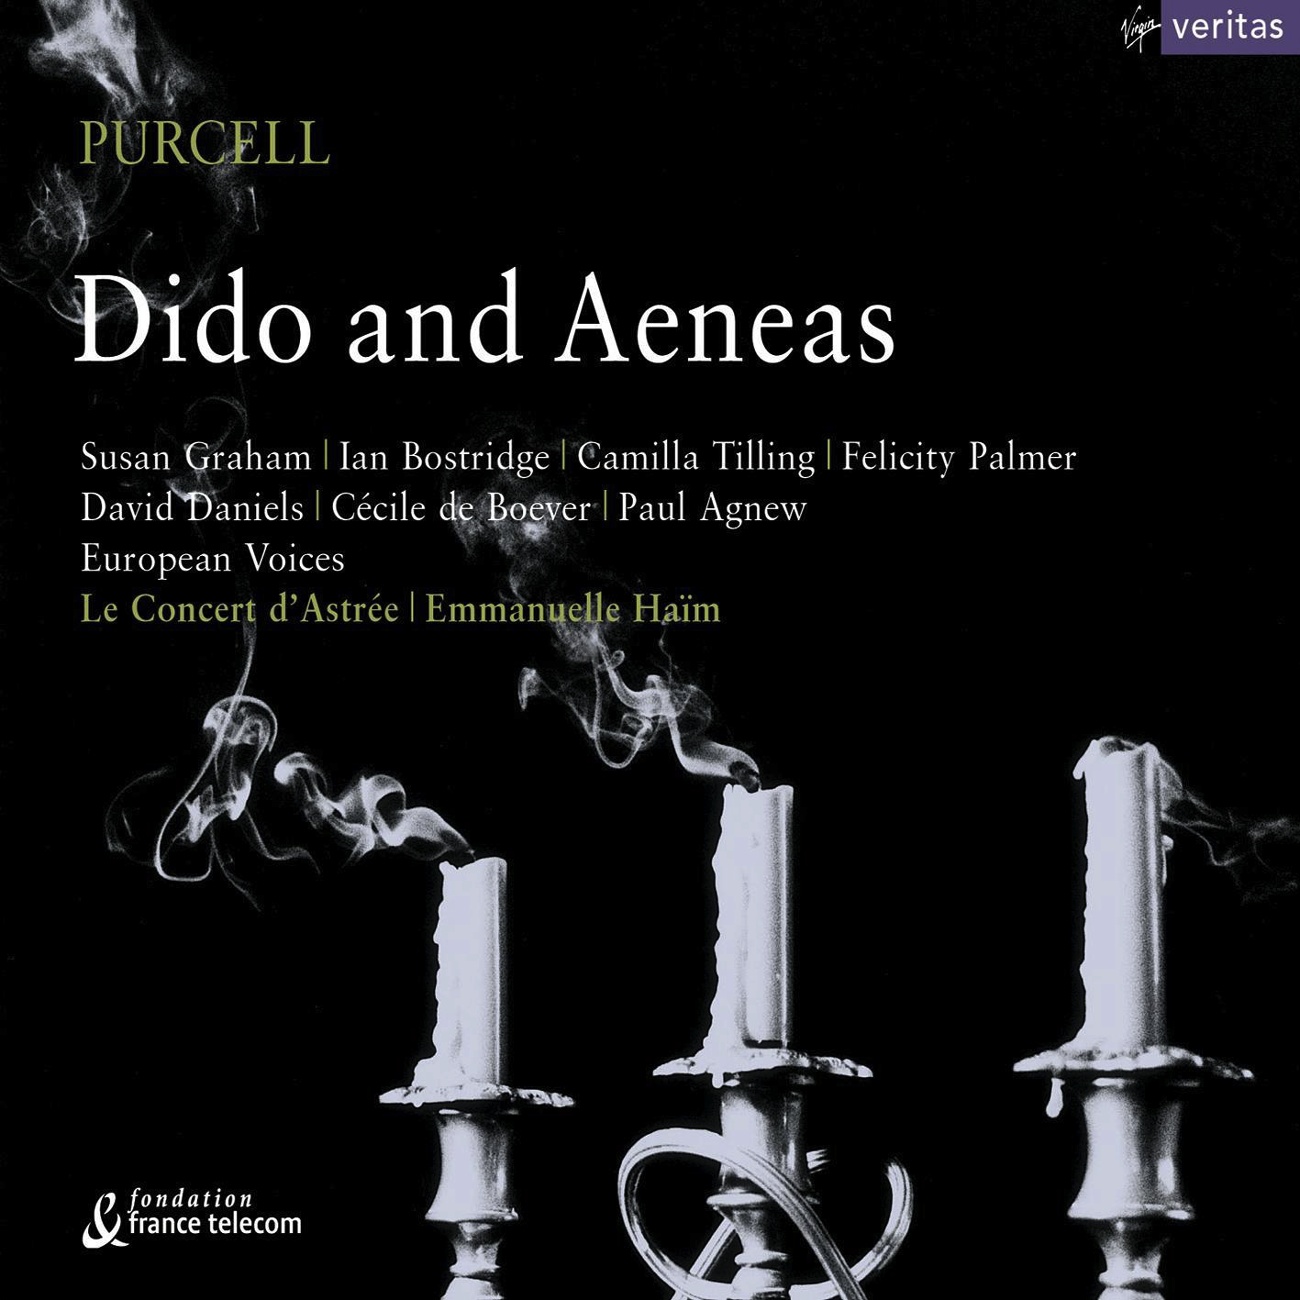 Dido and Aeneas, ACT 1: Scene: The Palast: See, your Royal Guest appears (Belinda-Aeneas-Dido)